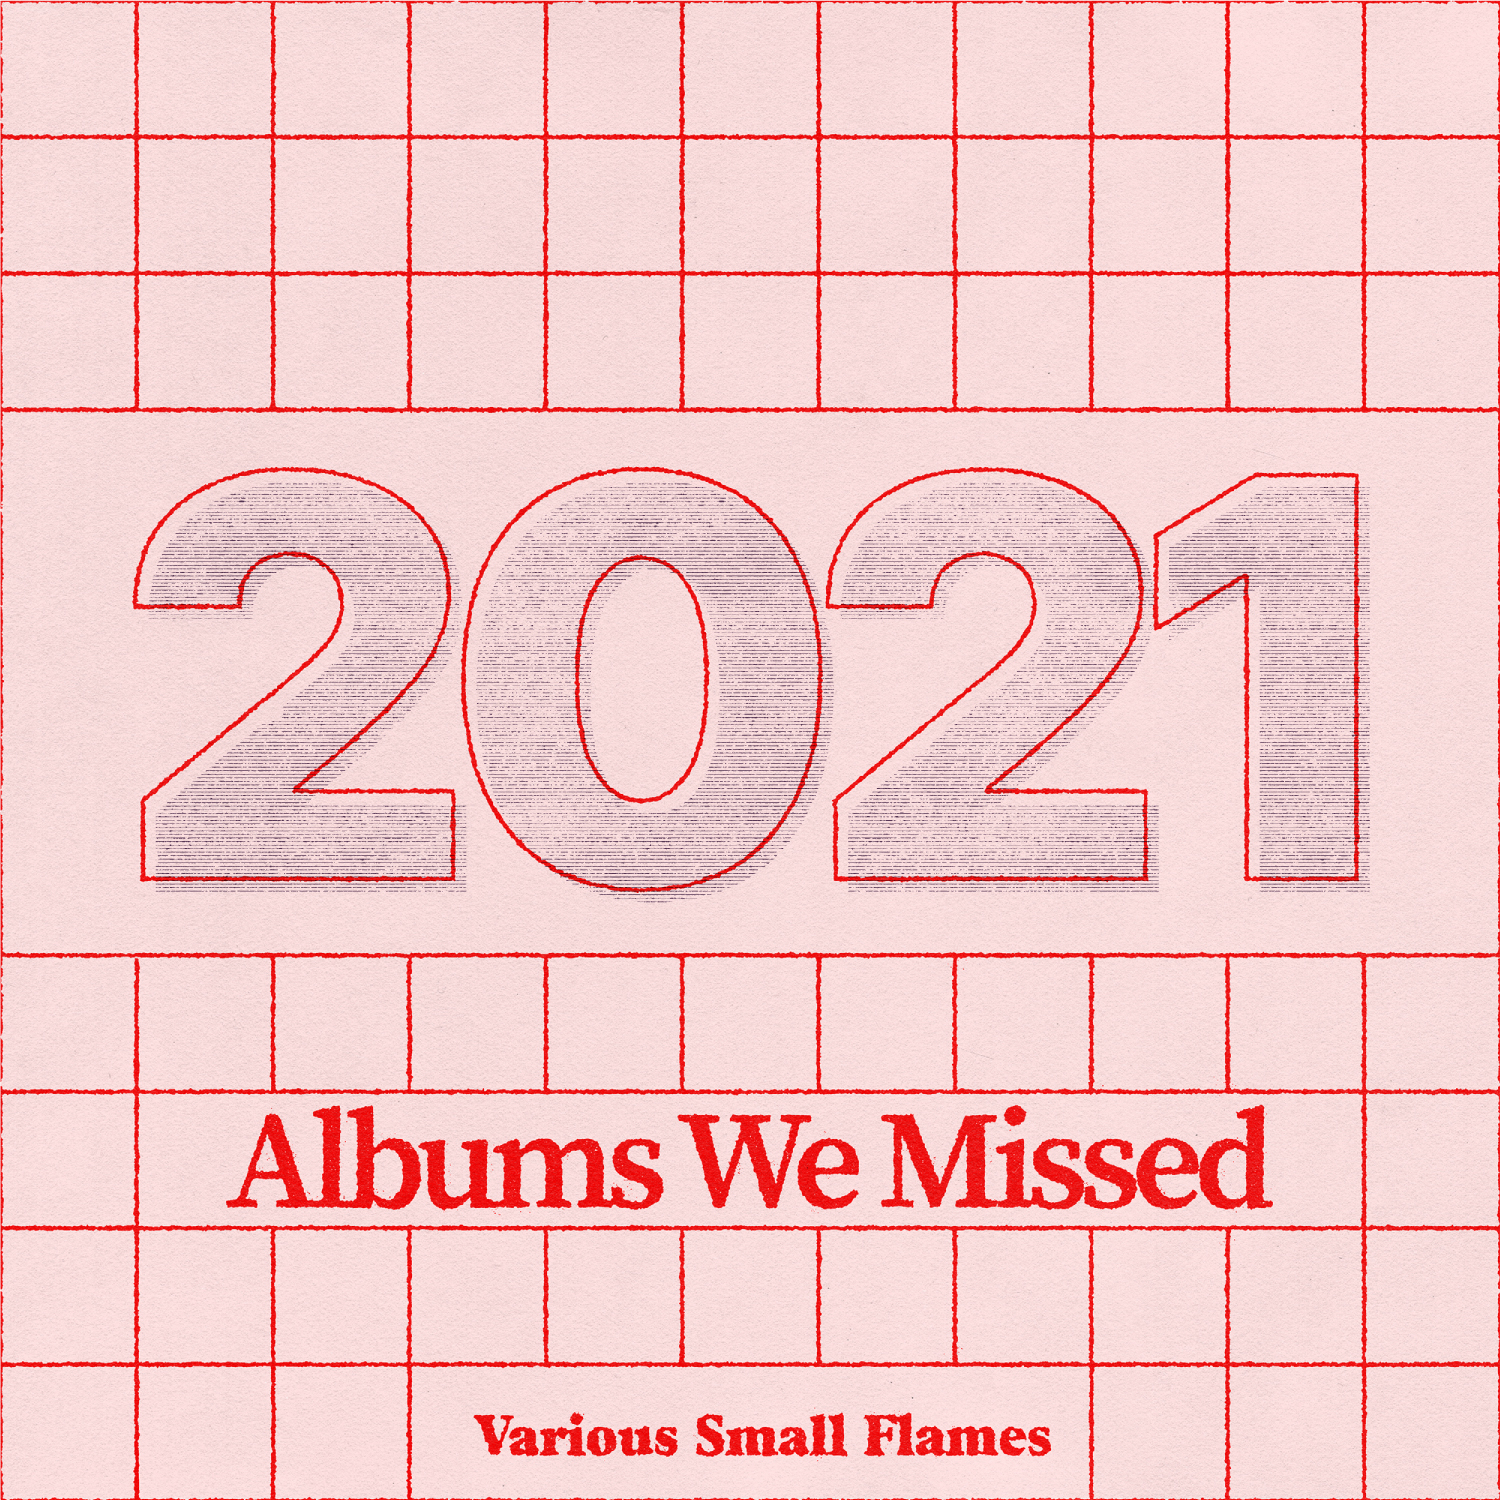 text that reads 2021 - Albums we missed in red ink on a pink background